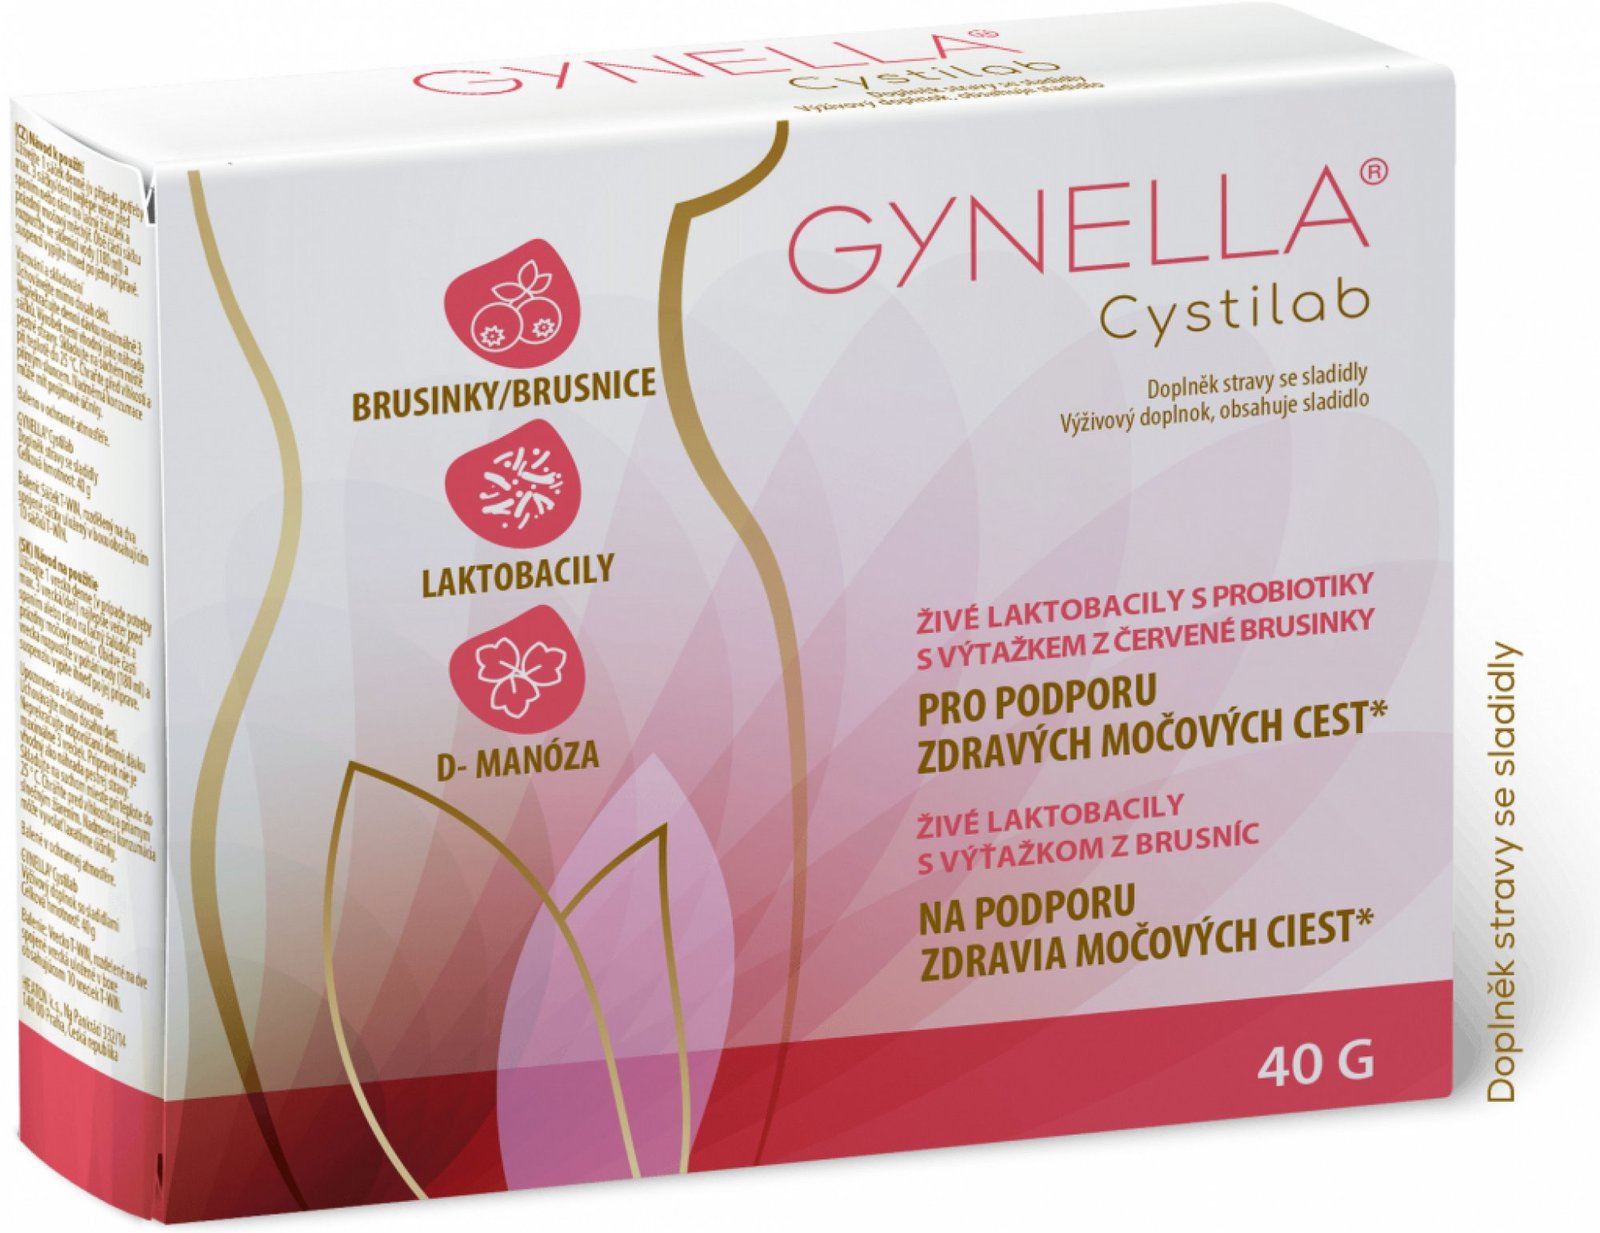 Gynella Cystilab Two Part Bags 10x4g To Support Proper Function Of Urinary Tract Vaginal Yeast 7793